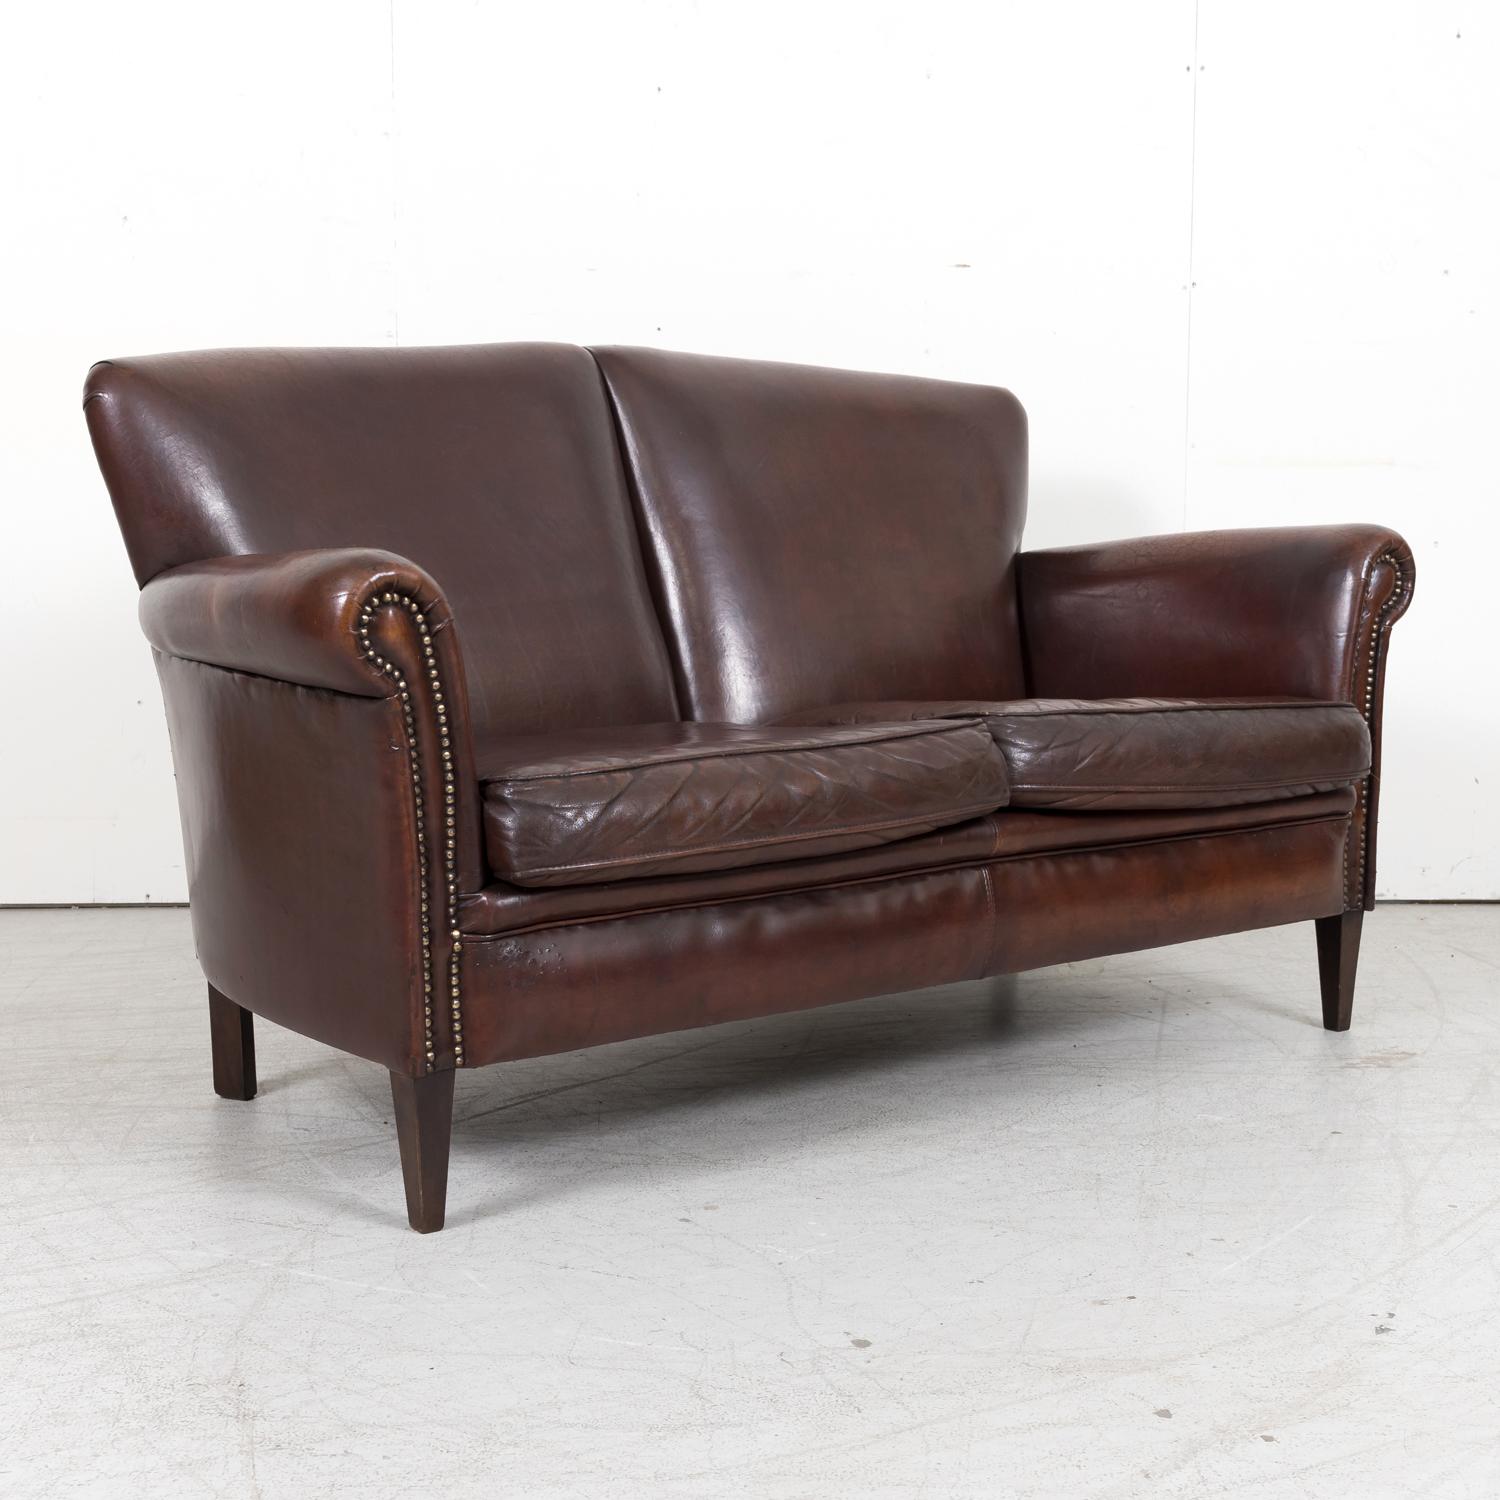 A wonderful 20th century French Art Deco two seater settee or sofa in original dark brown leather, circa 1930s, having a tight back, scrolled arms with nailhead trim, and two loose seat cushions. Raised on short tapered walnut legs. All original.